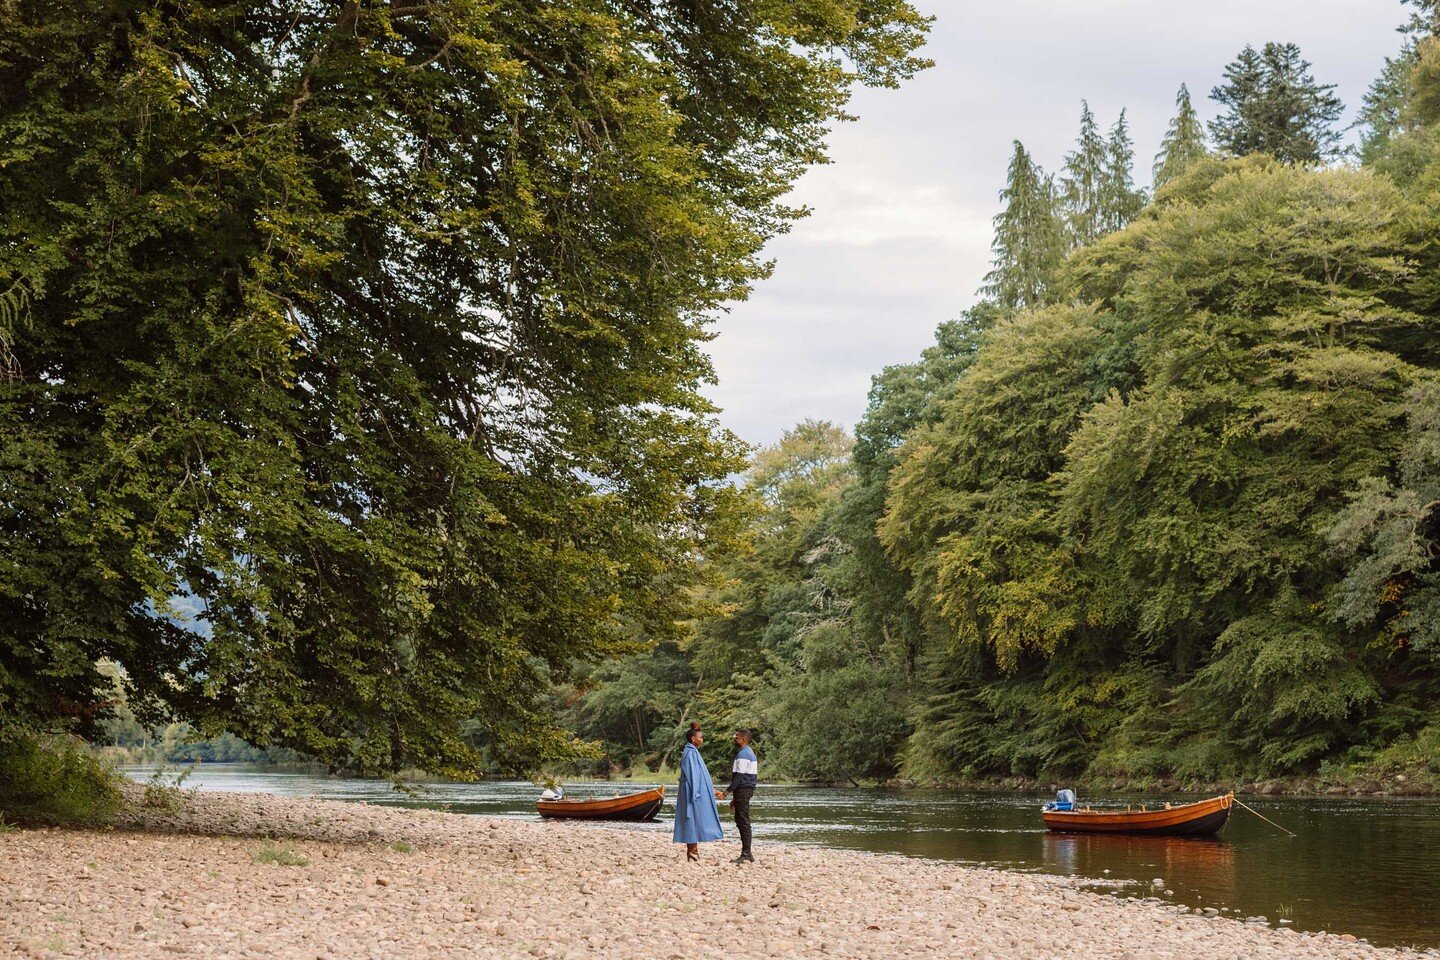 A beautiful little love story for you this Wednesday with Hilary &amp; Stephanie who got engaged by the River Tay down from @dunkeldhouse earlier this month ✨ Congratulations to you both!

#dunkeld #perthshire #engagement #engagementphotos #proposal 